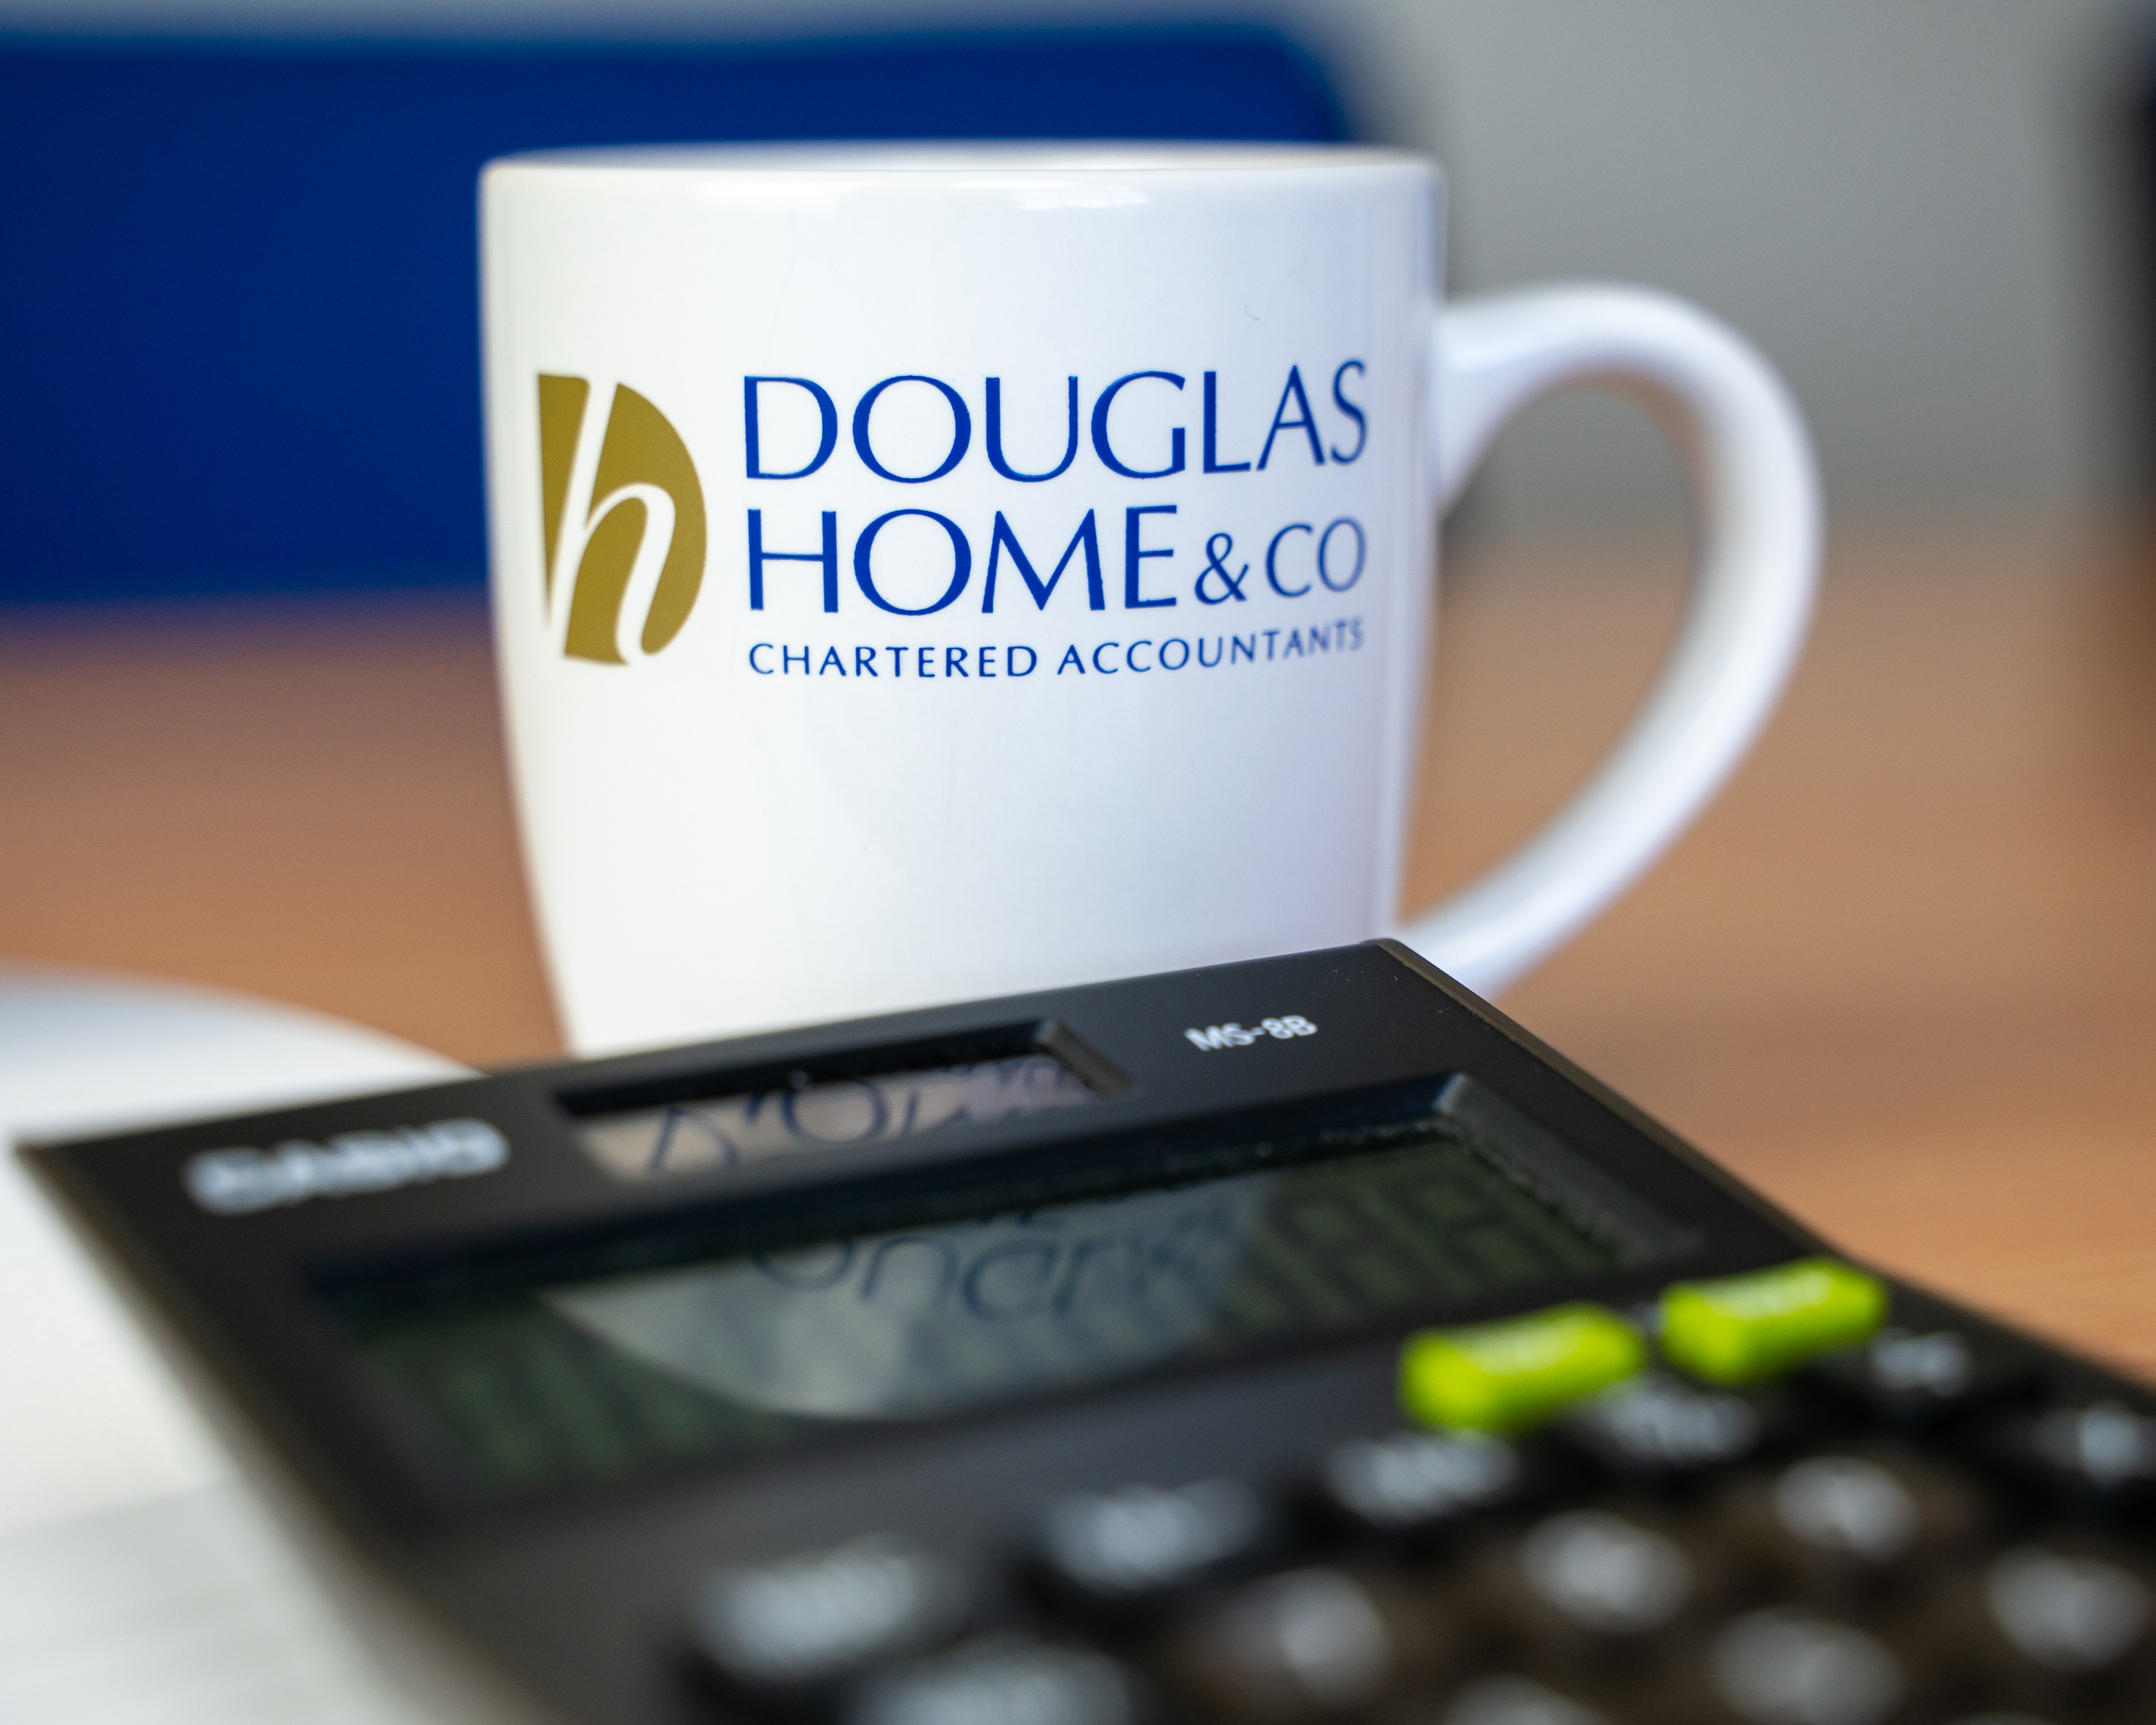 Douglas Home & Co introduce new COVID-19 resilience plan